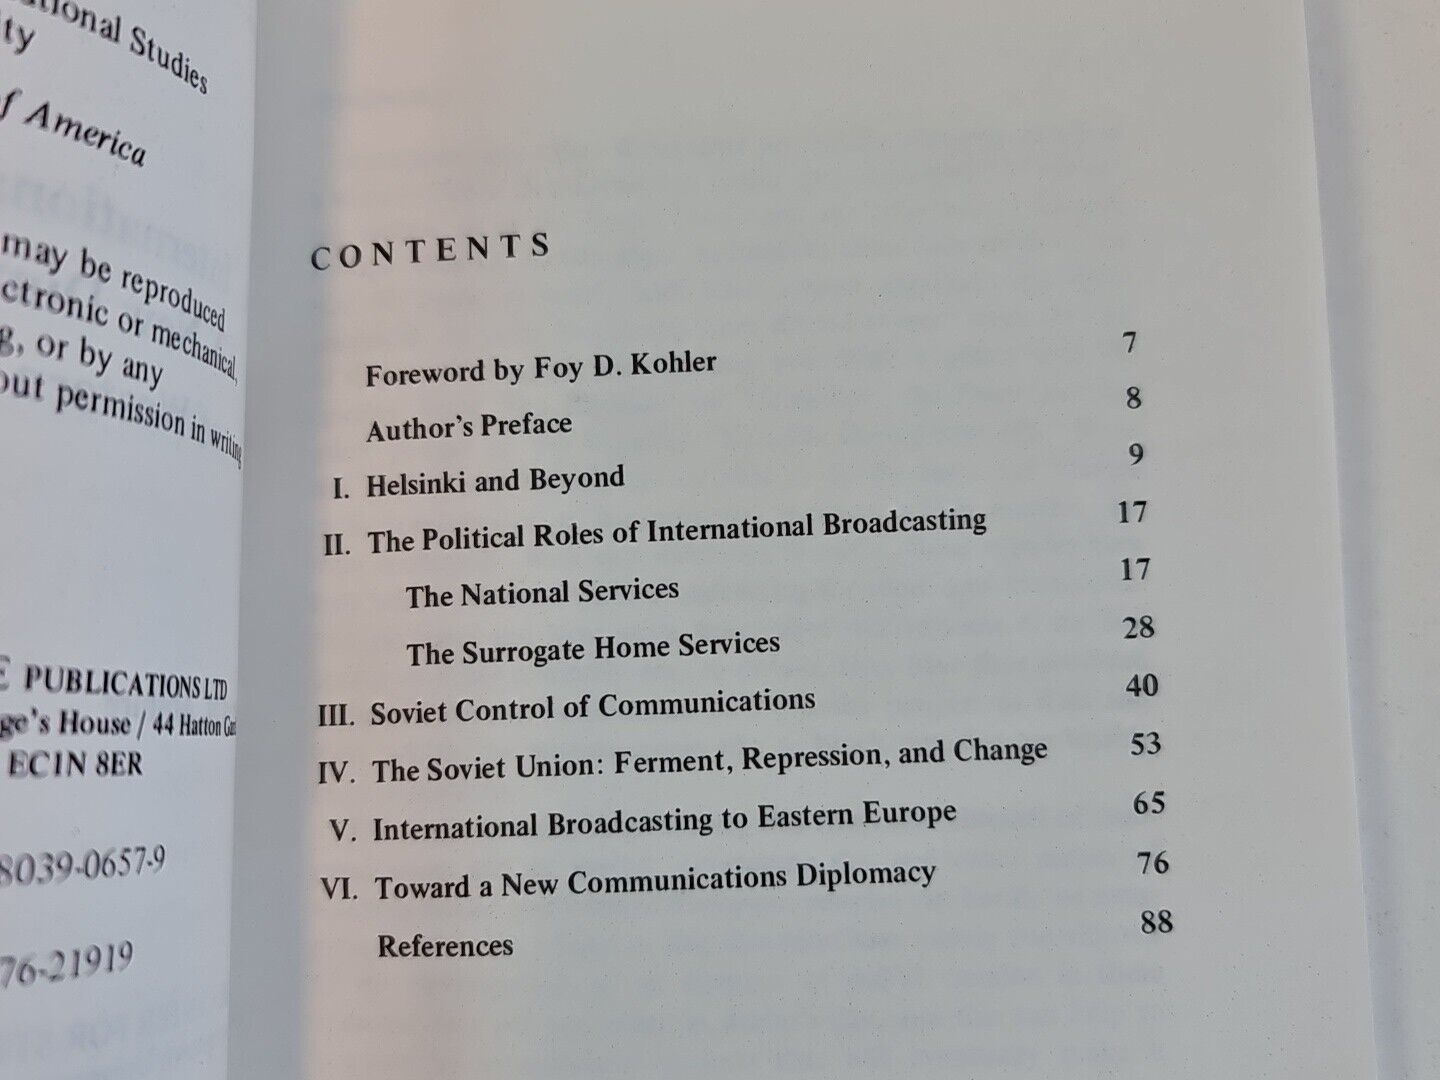 International Broadcasting: A New Dimension of Western Diplomacy by Abshire (1976)